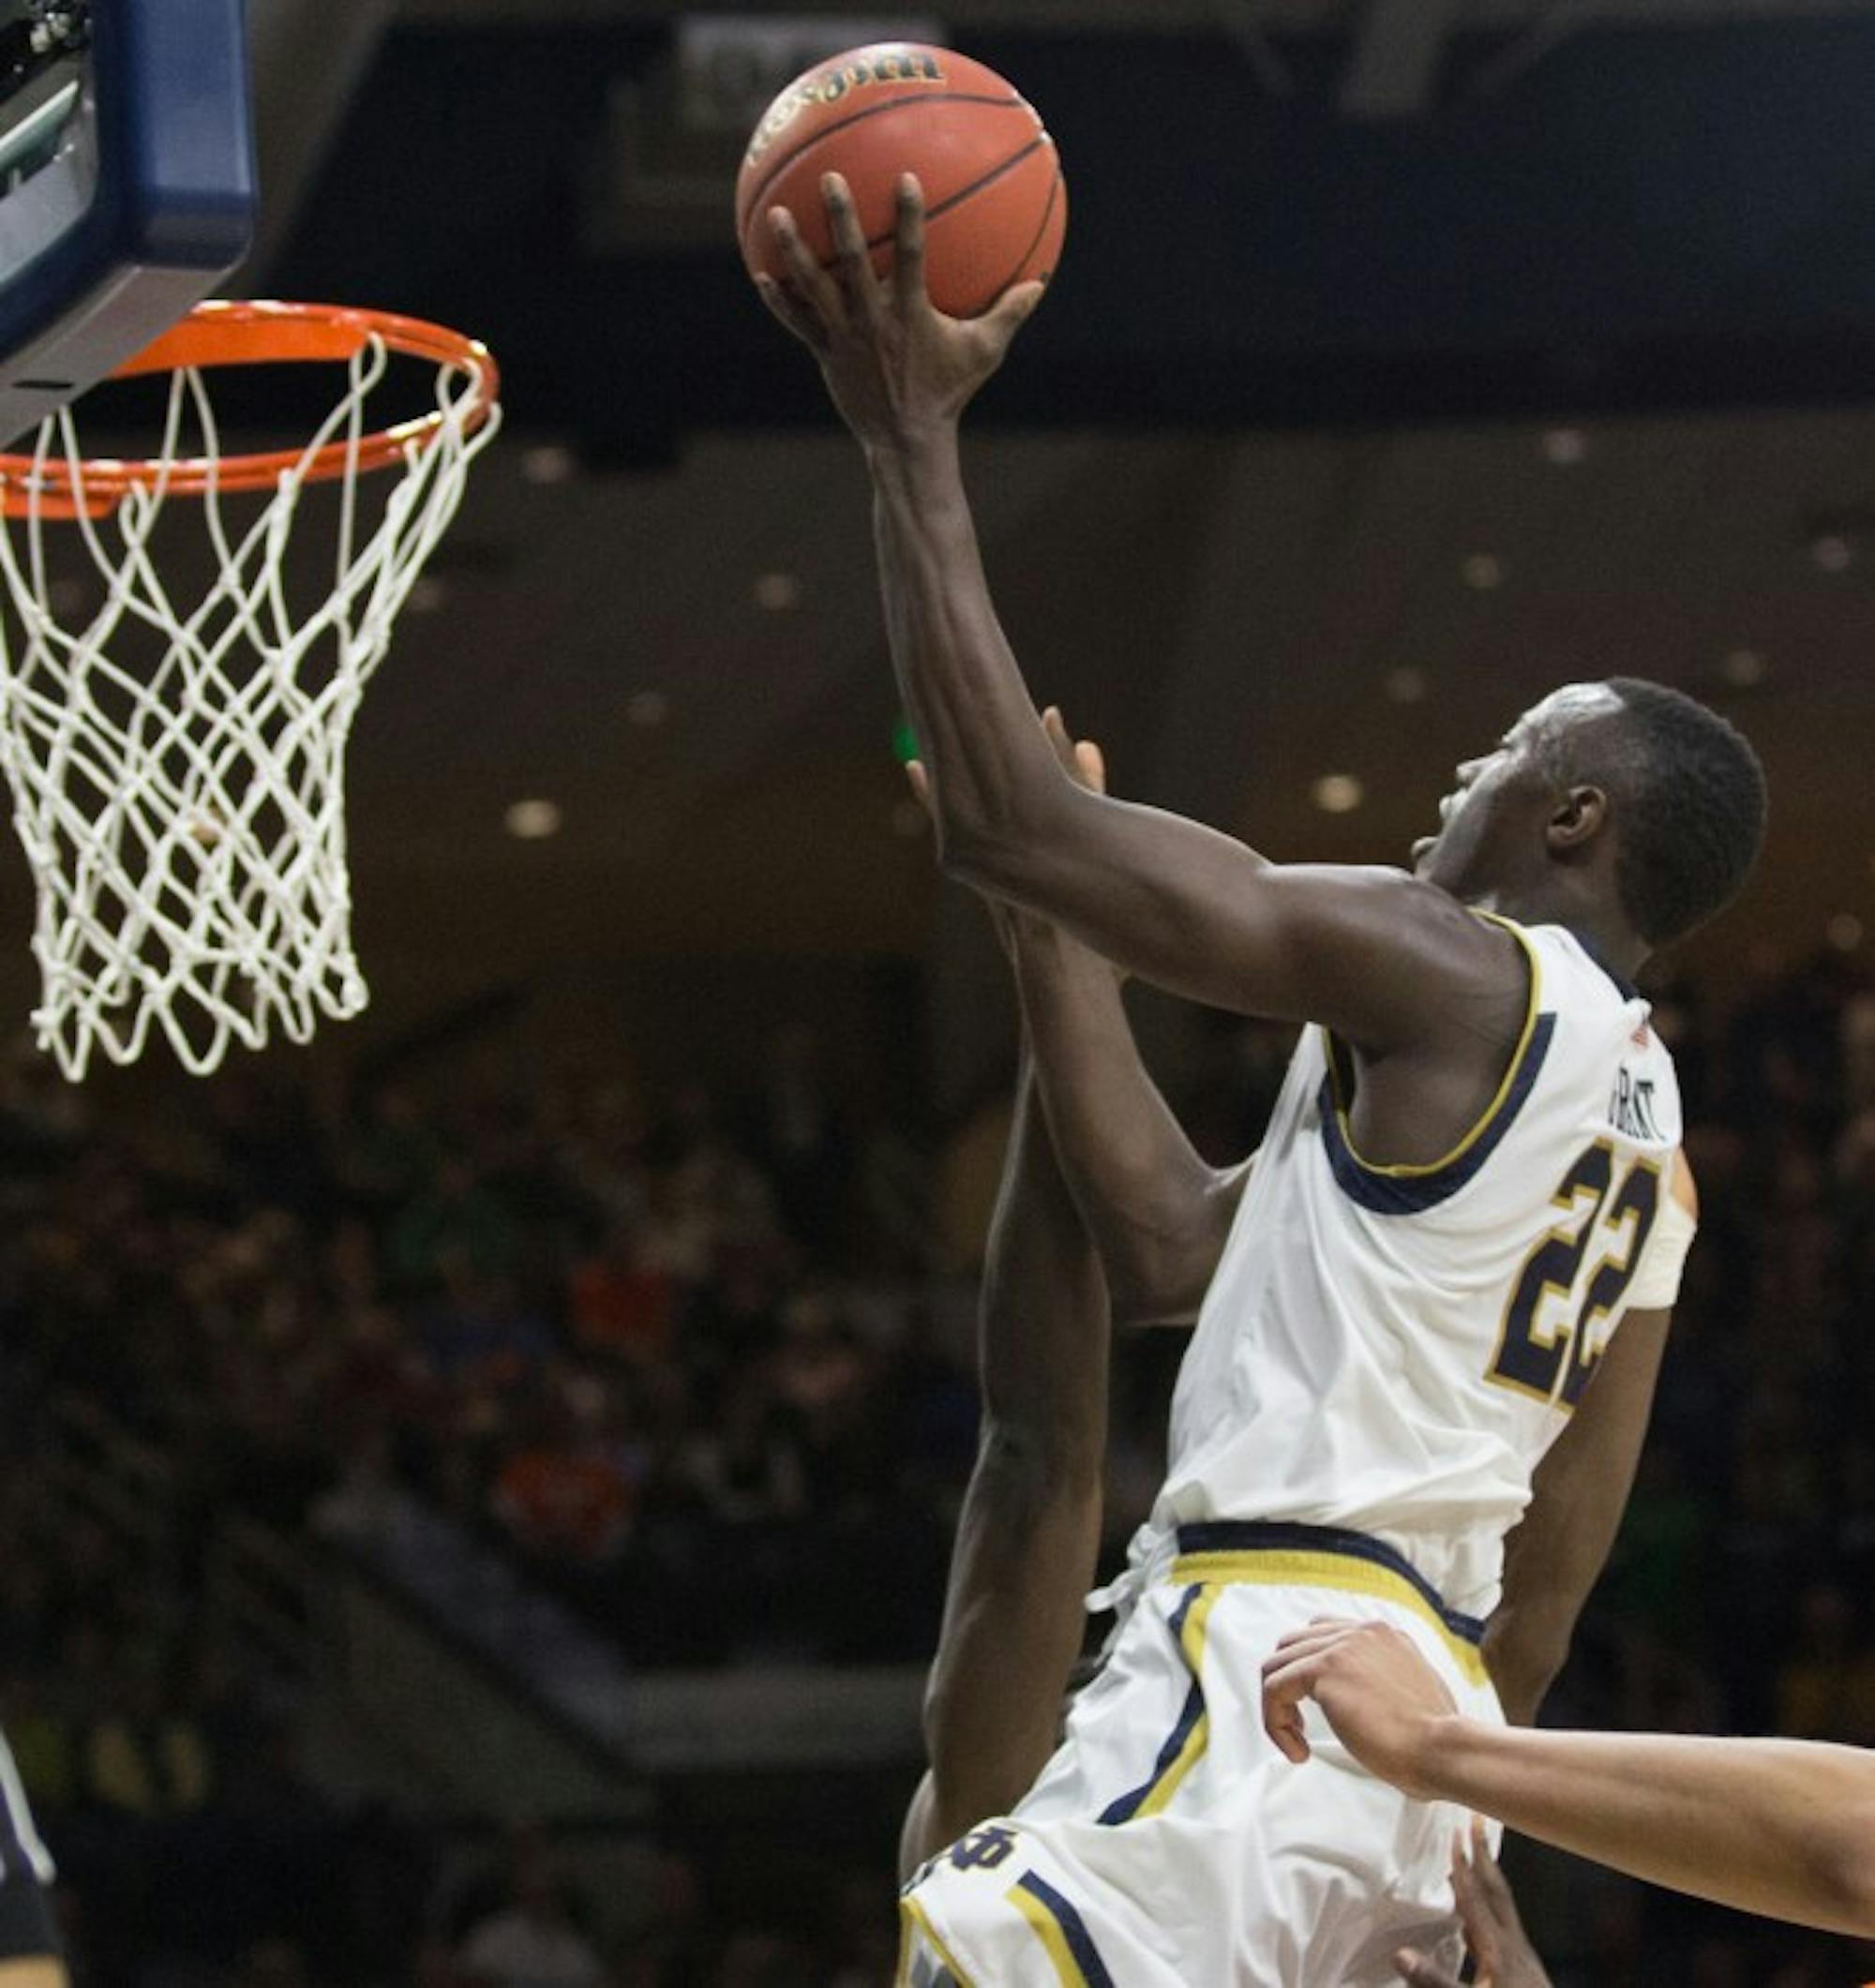 Irish senior guard Jerian Grant rises for a lay-up during Notre Dame's 65-60 loss to Syracuse.